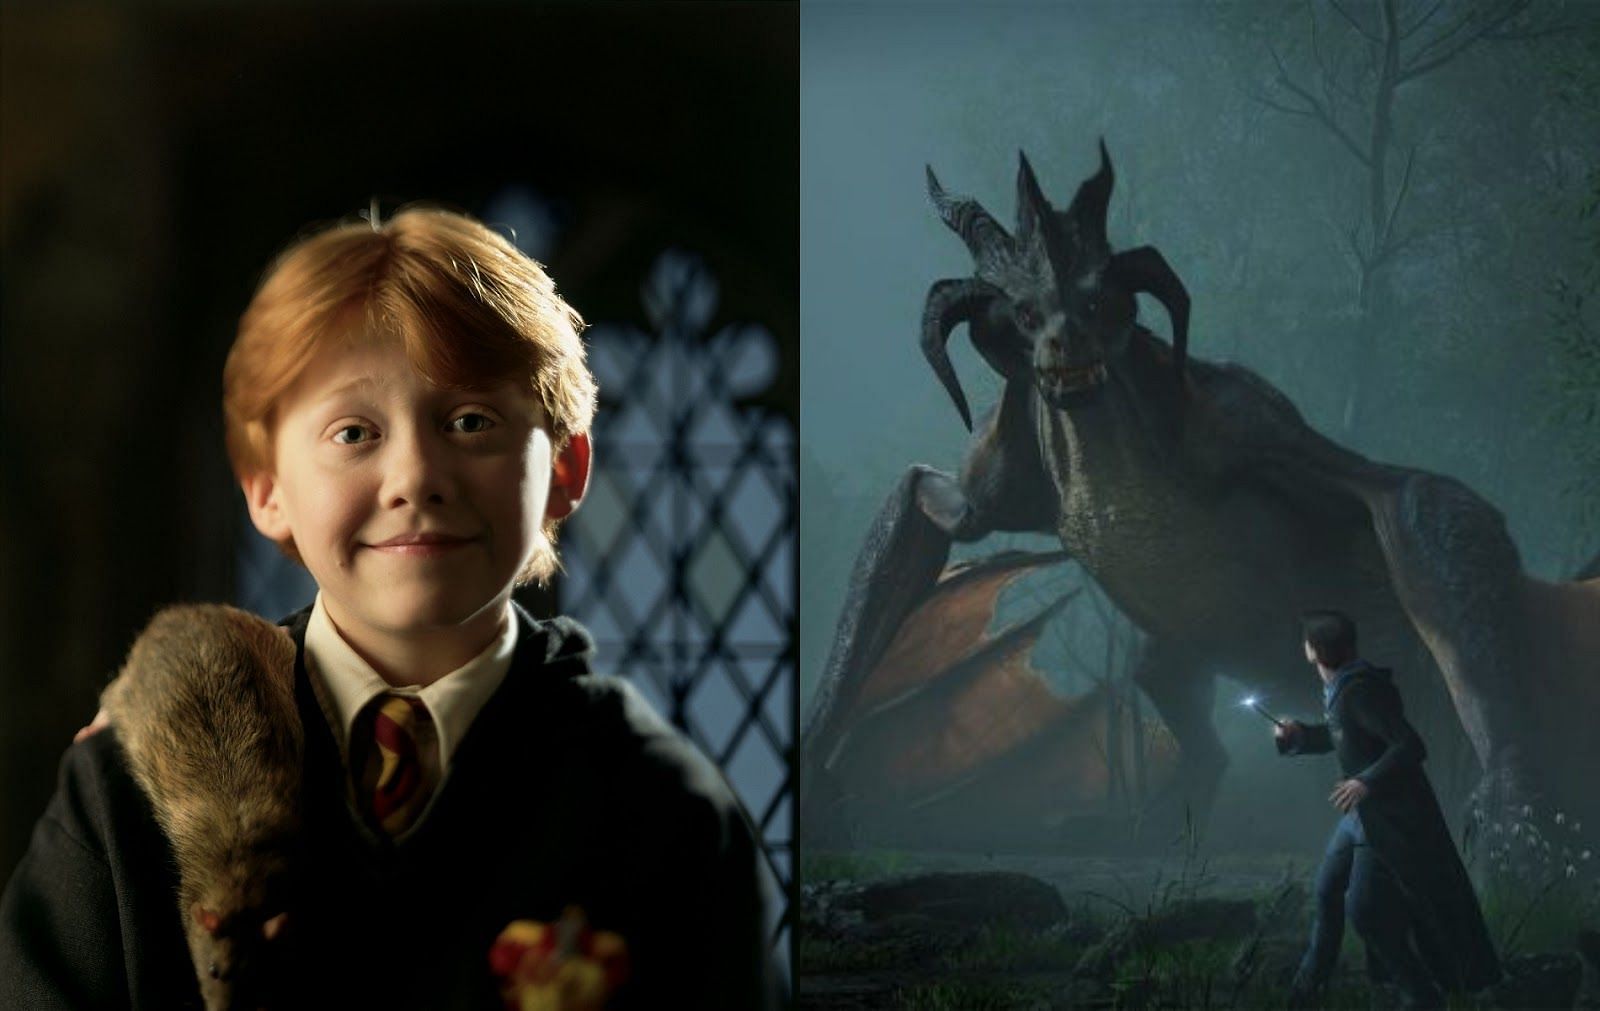 Ron Weasley as portrayed by Rupert Grint and gameplay (Image by WB Pictures and WB Games)